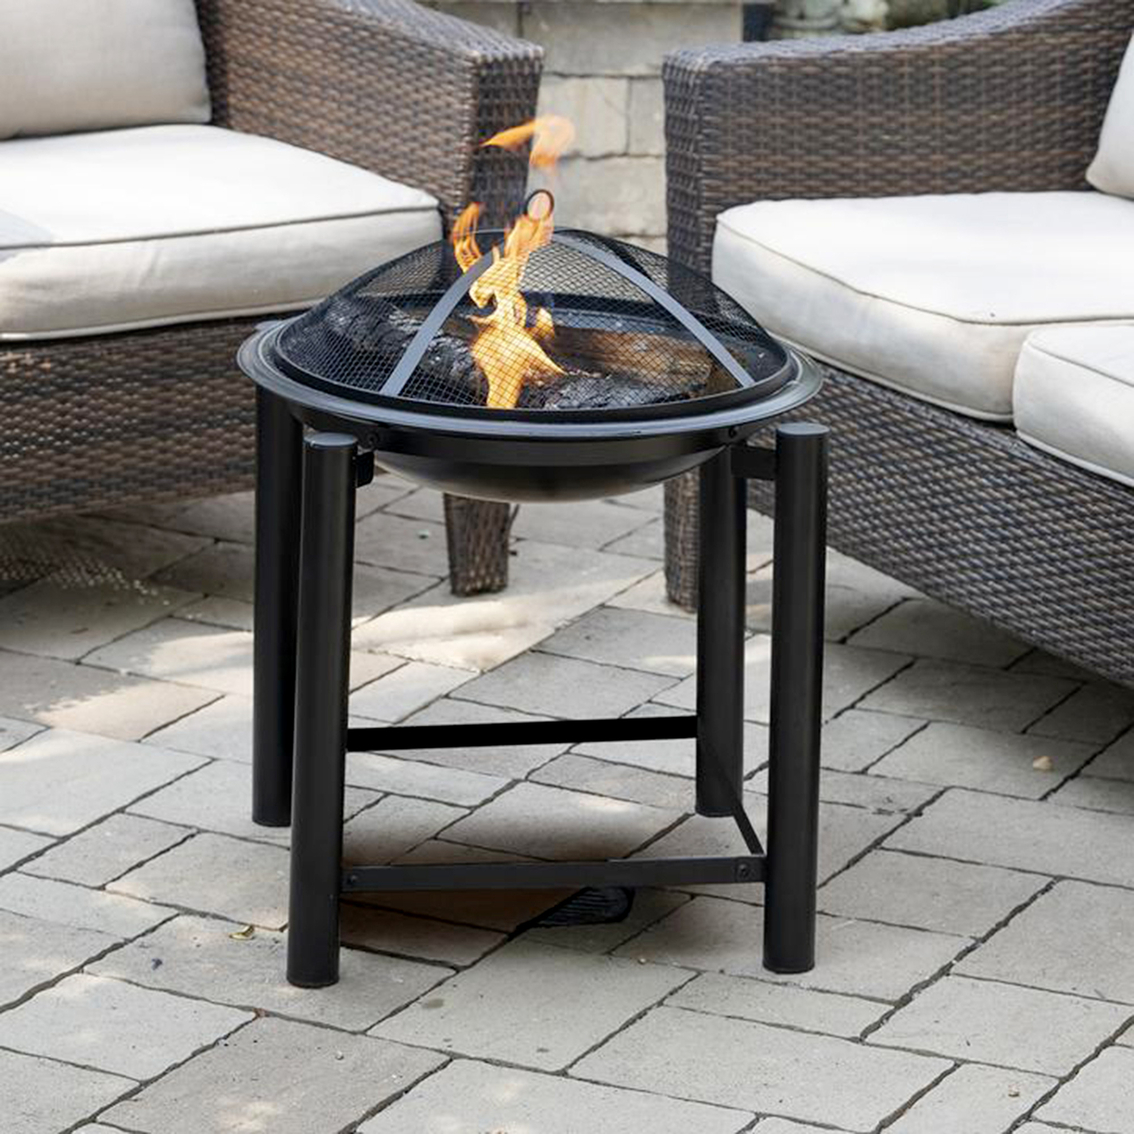 Blue Sky Outdoor Living 21 in. Square Raised Fire Pit - Image 2 of 2